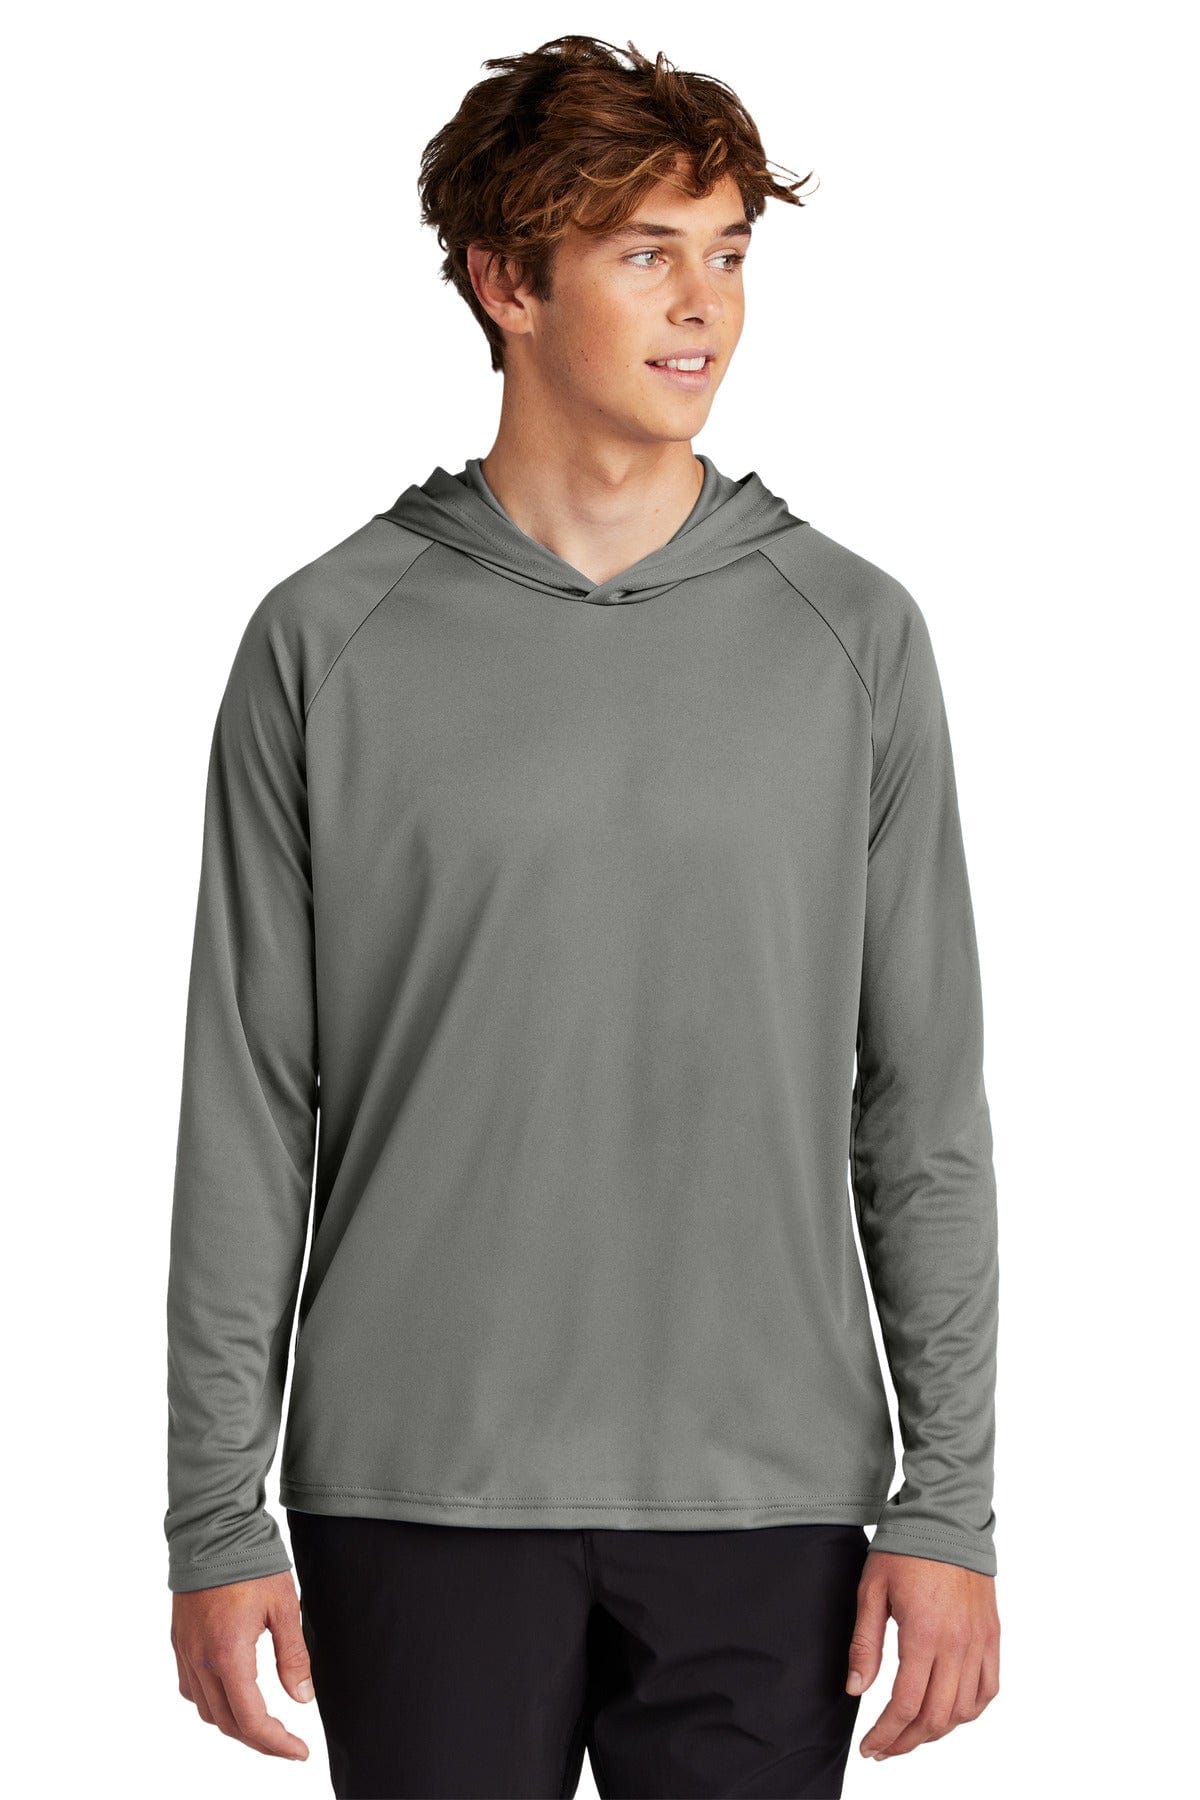 Port & Company ® Performance Pullover Hooded Tee PC380H